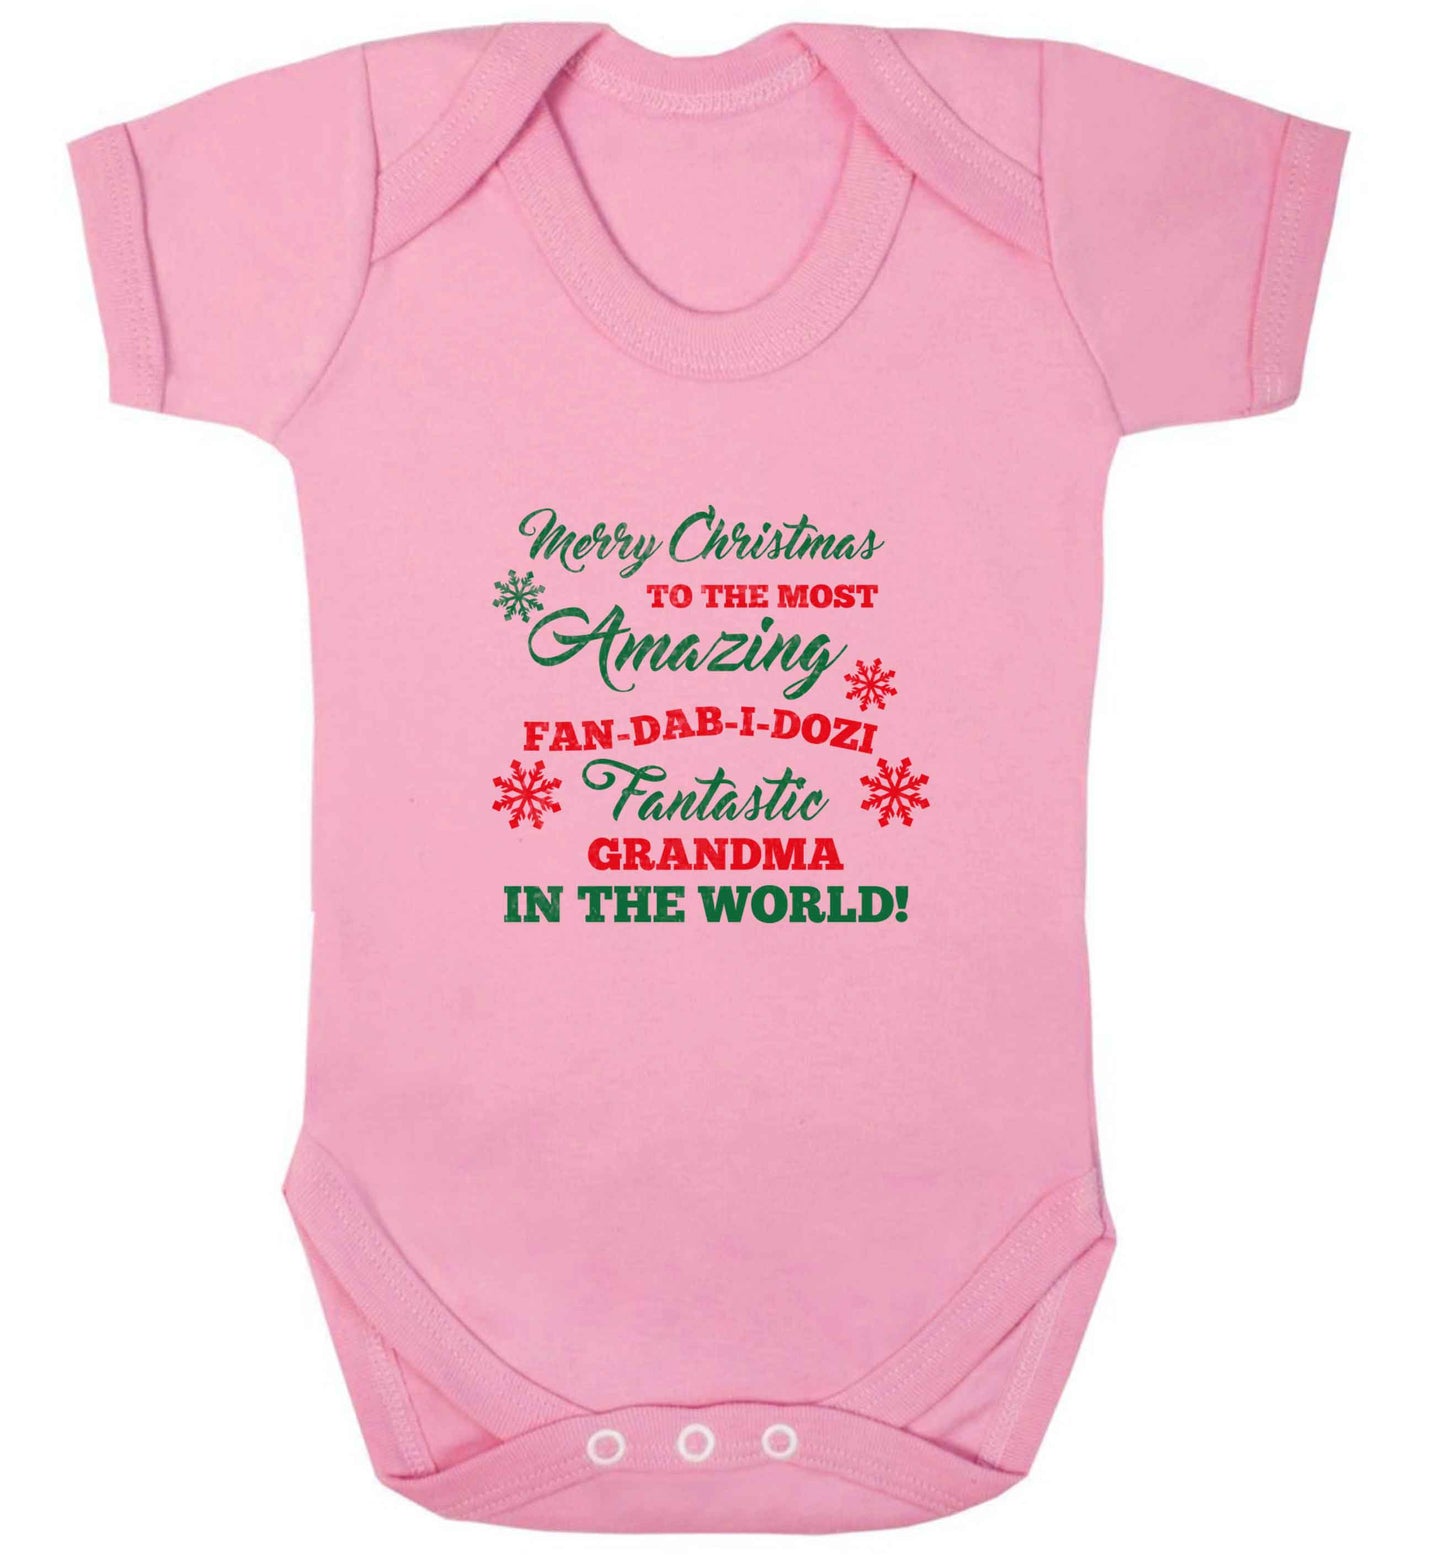 Merry Christmas to the most amazing fan-dab-i-dozi fantasic Grandma in the world baby vest pale pink 18-24 months